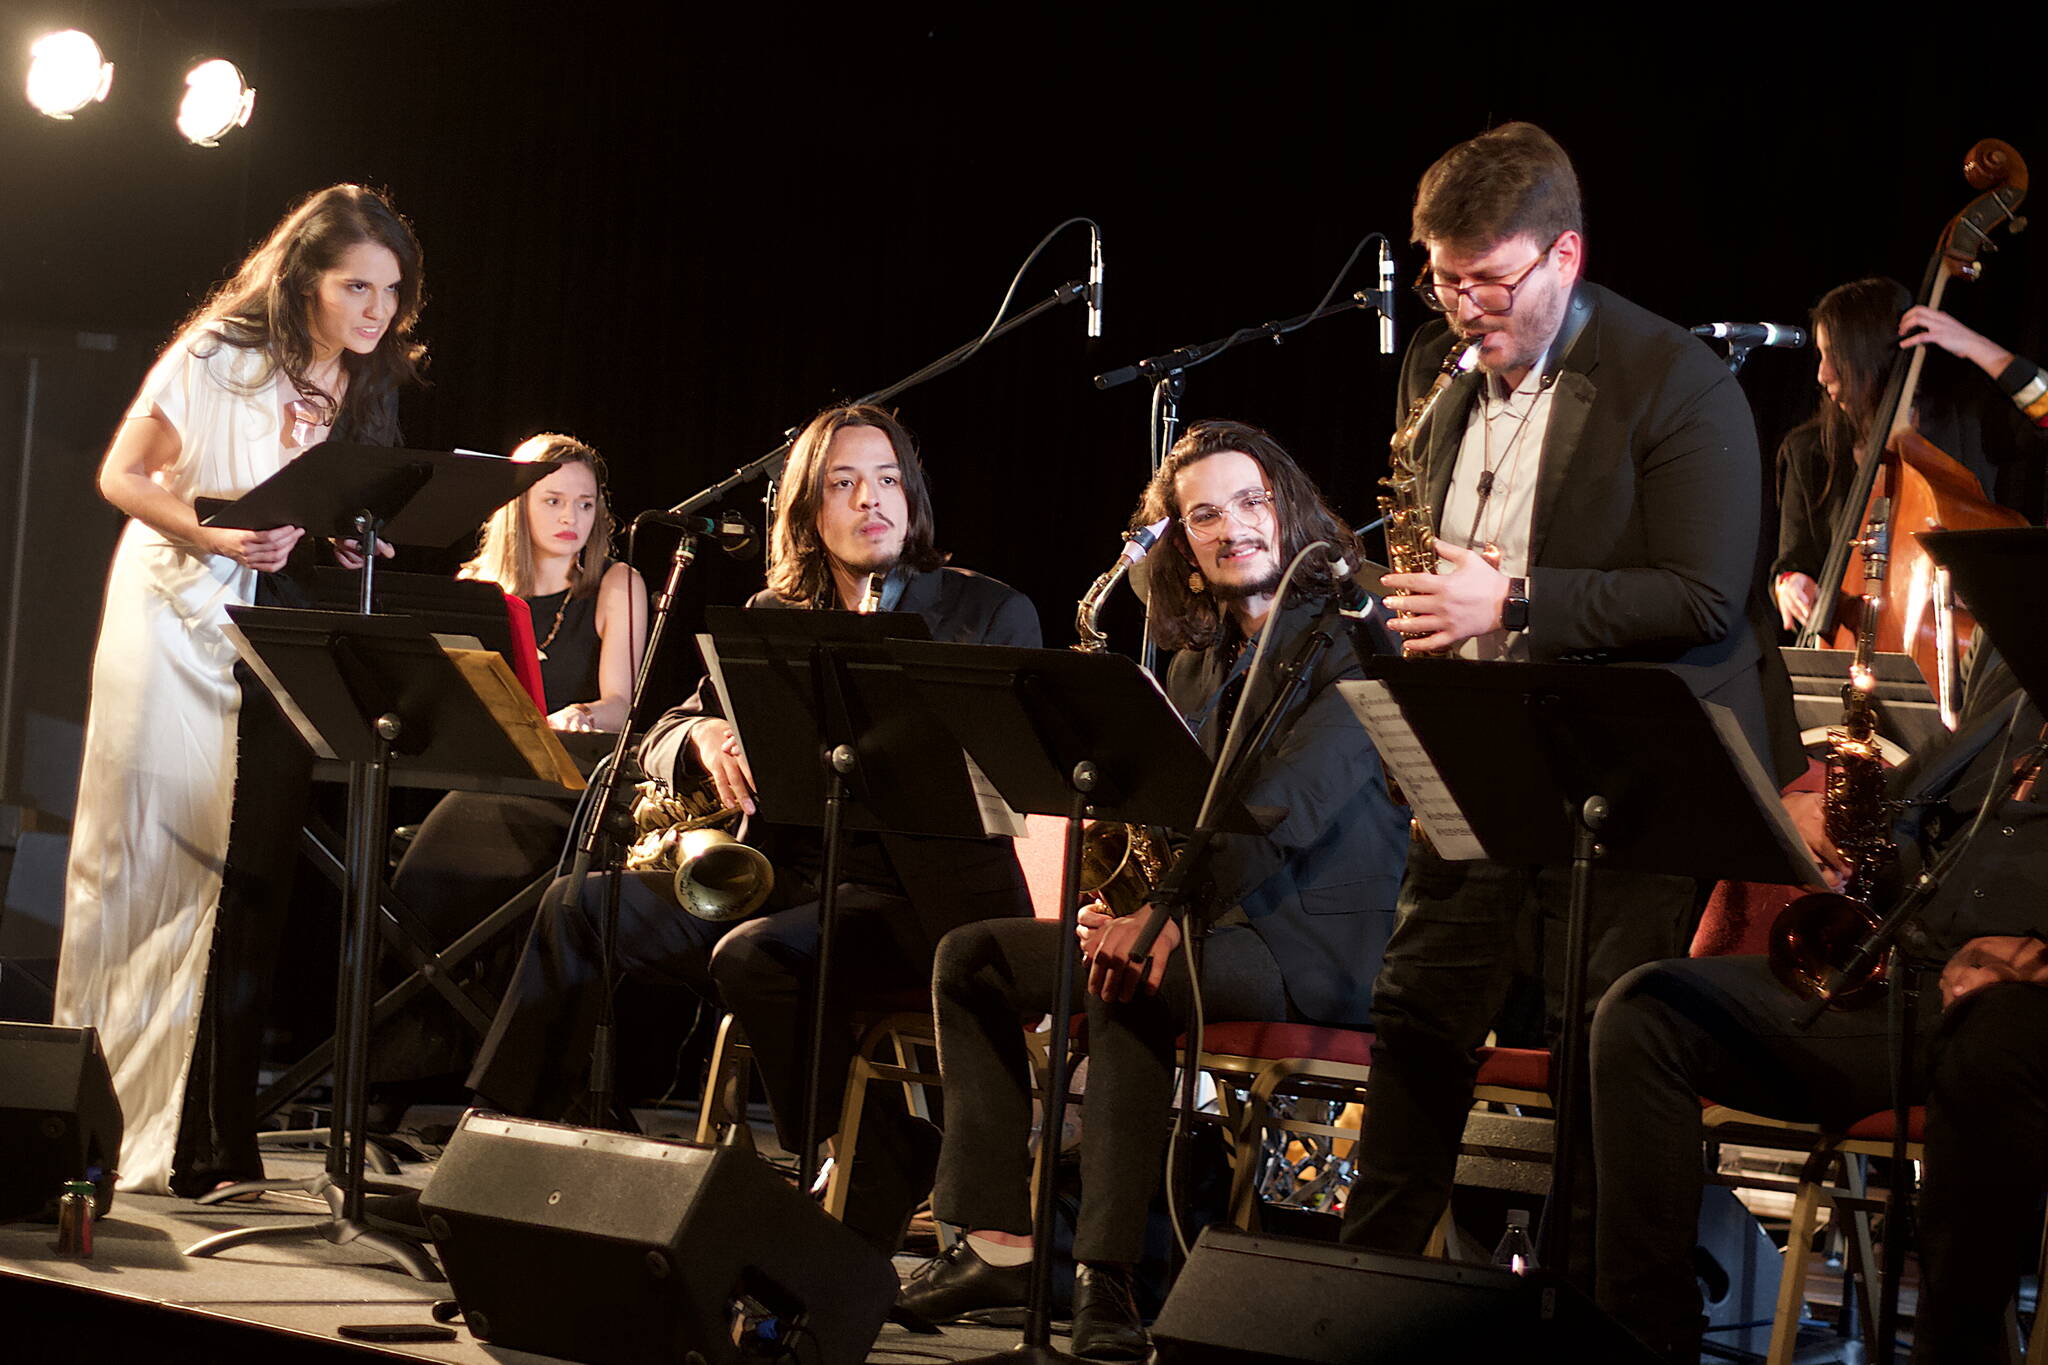 Julia Keefe, left, guides her Indigenous Big Band through a performance at Elizabeth Peratrovich Hall to open this spring’s Juneau Jazz & Classics festival on Friday night. (Mark Sabbatini / Juneau Empire)